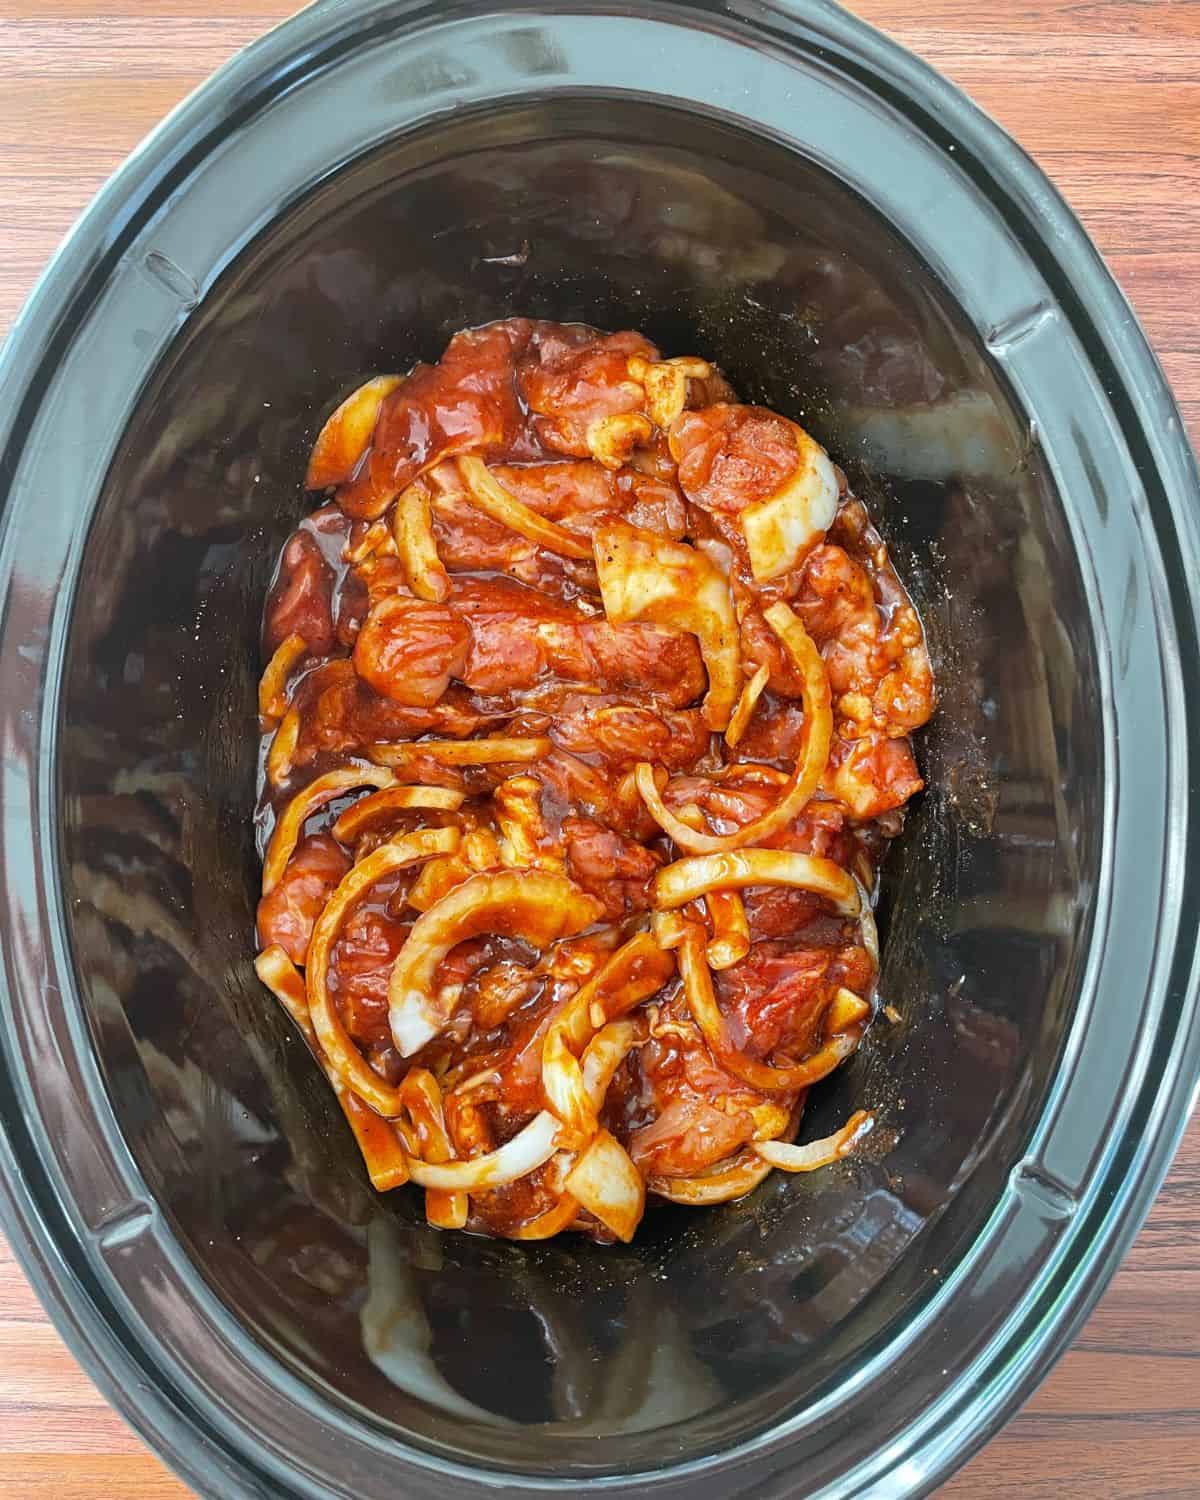 BBQ sauce is tossed into the onions and chicken thighs in the slow cooker.